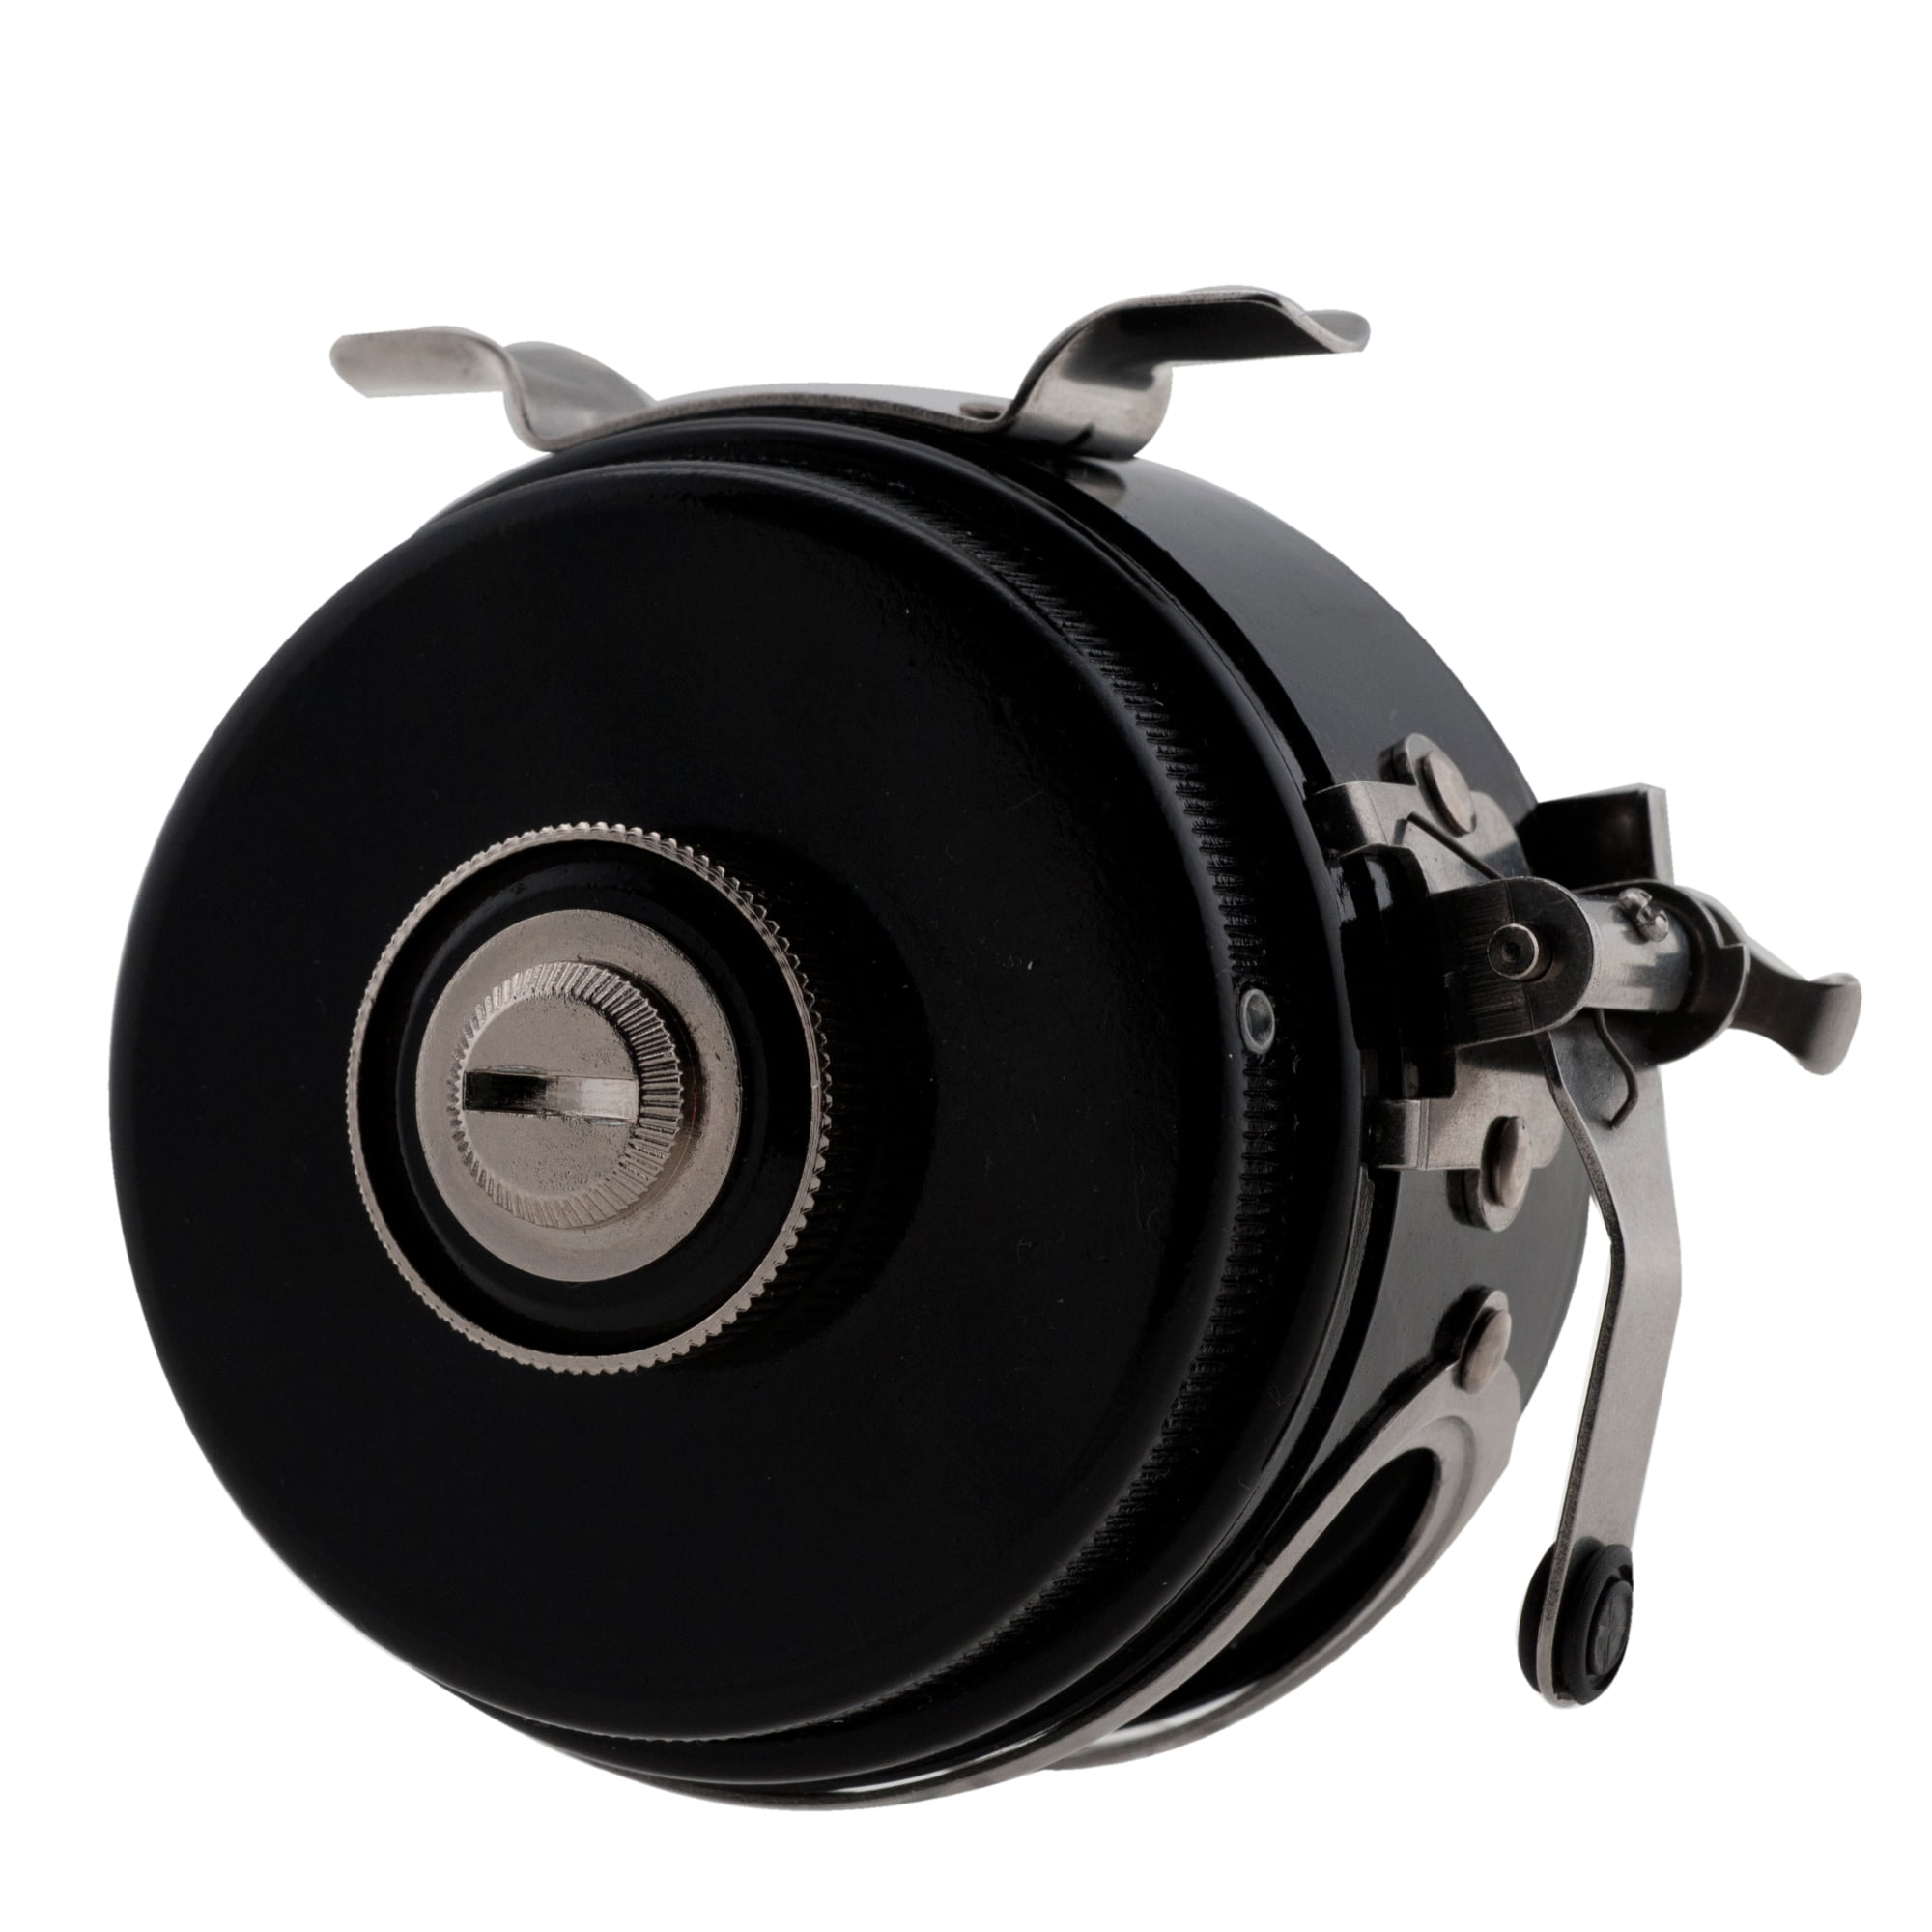 Pflueger Automatic Fly Reels, Size 44385 Fishing Reel 